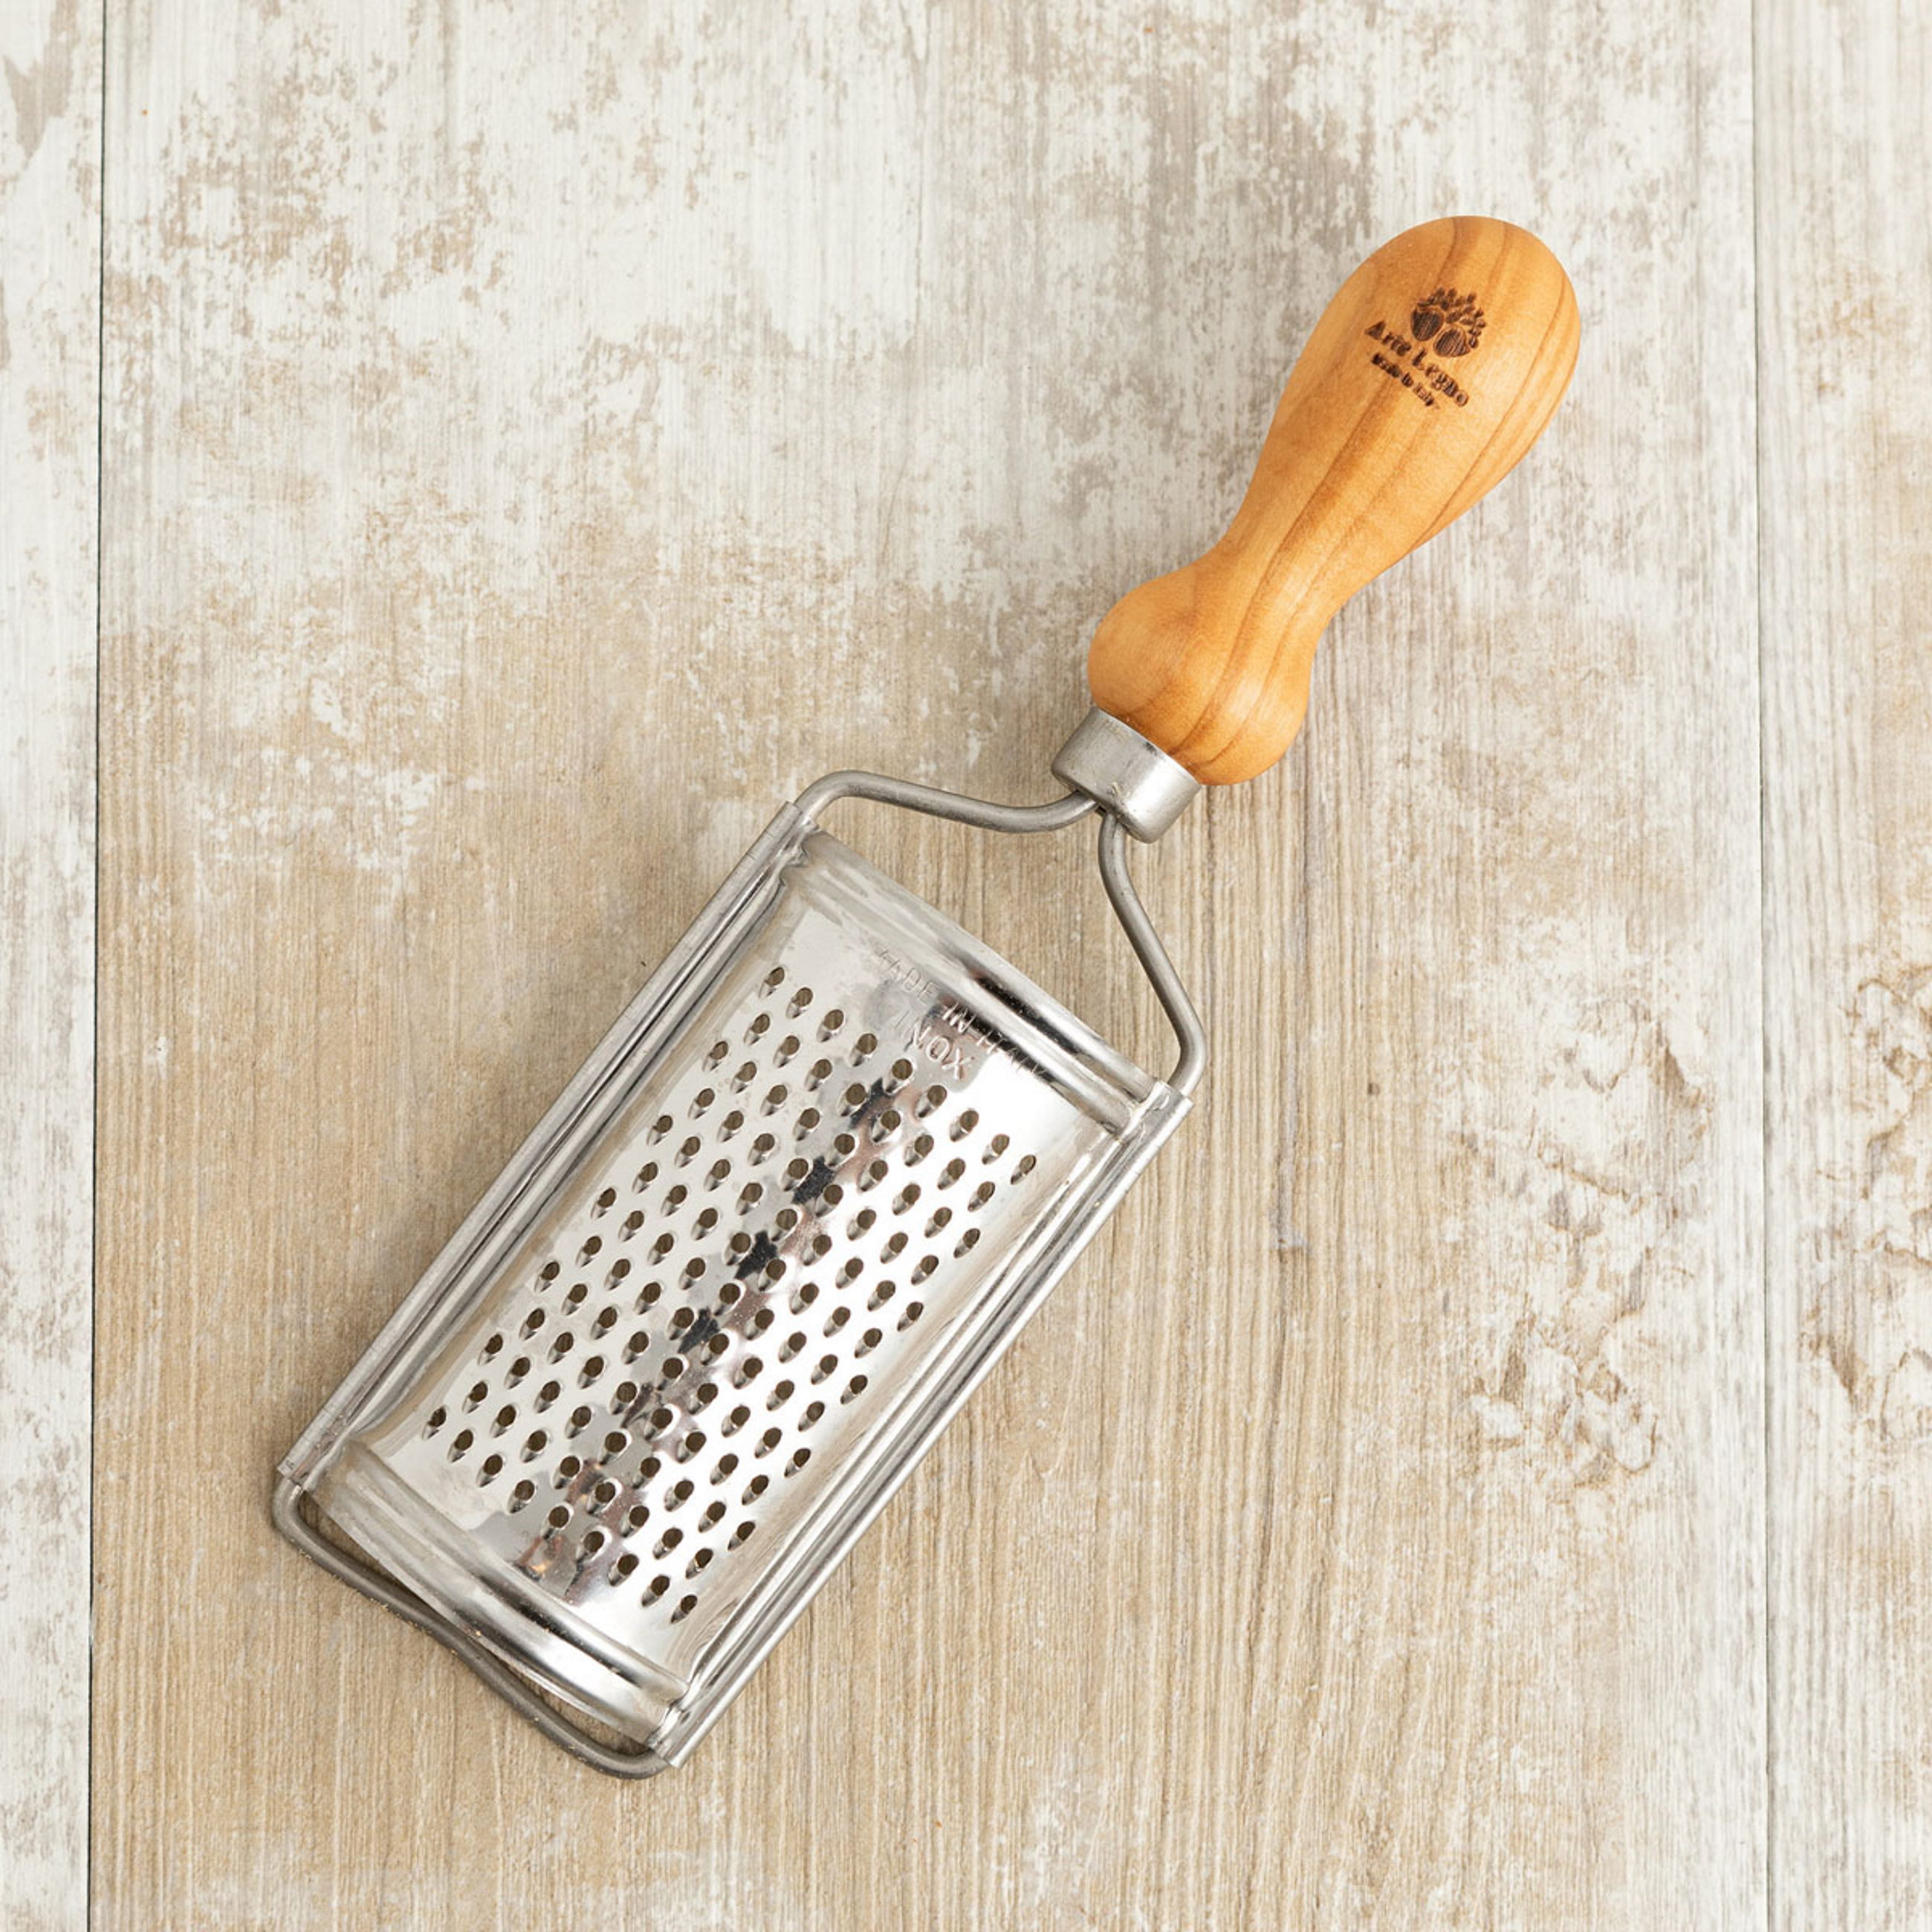 Barfly M37178 10 Zester Grater with Walnut Handle